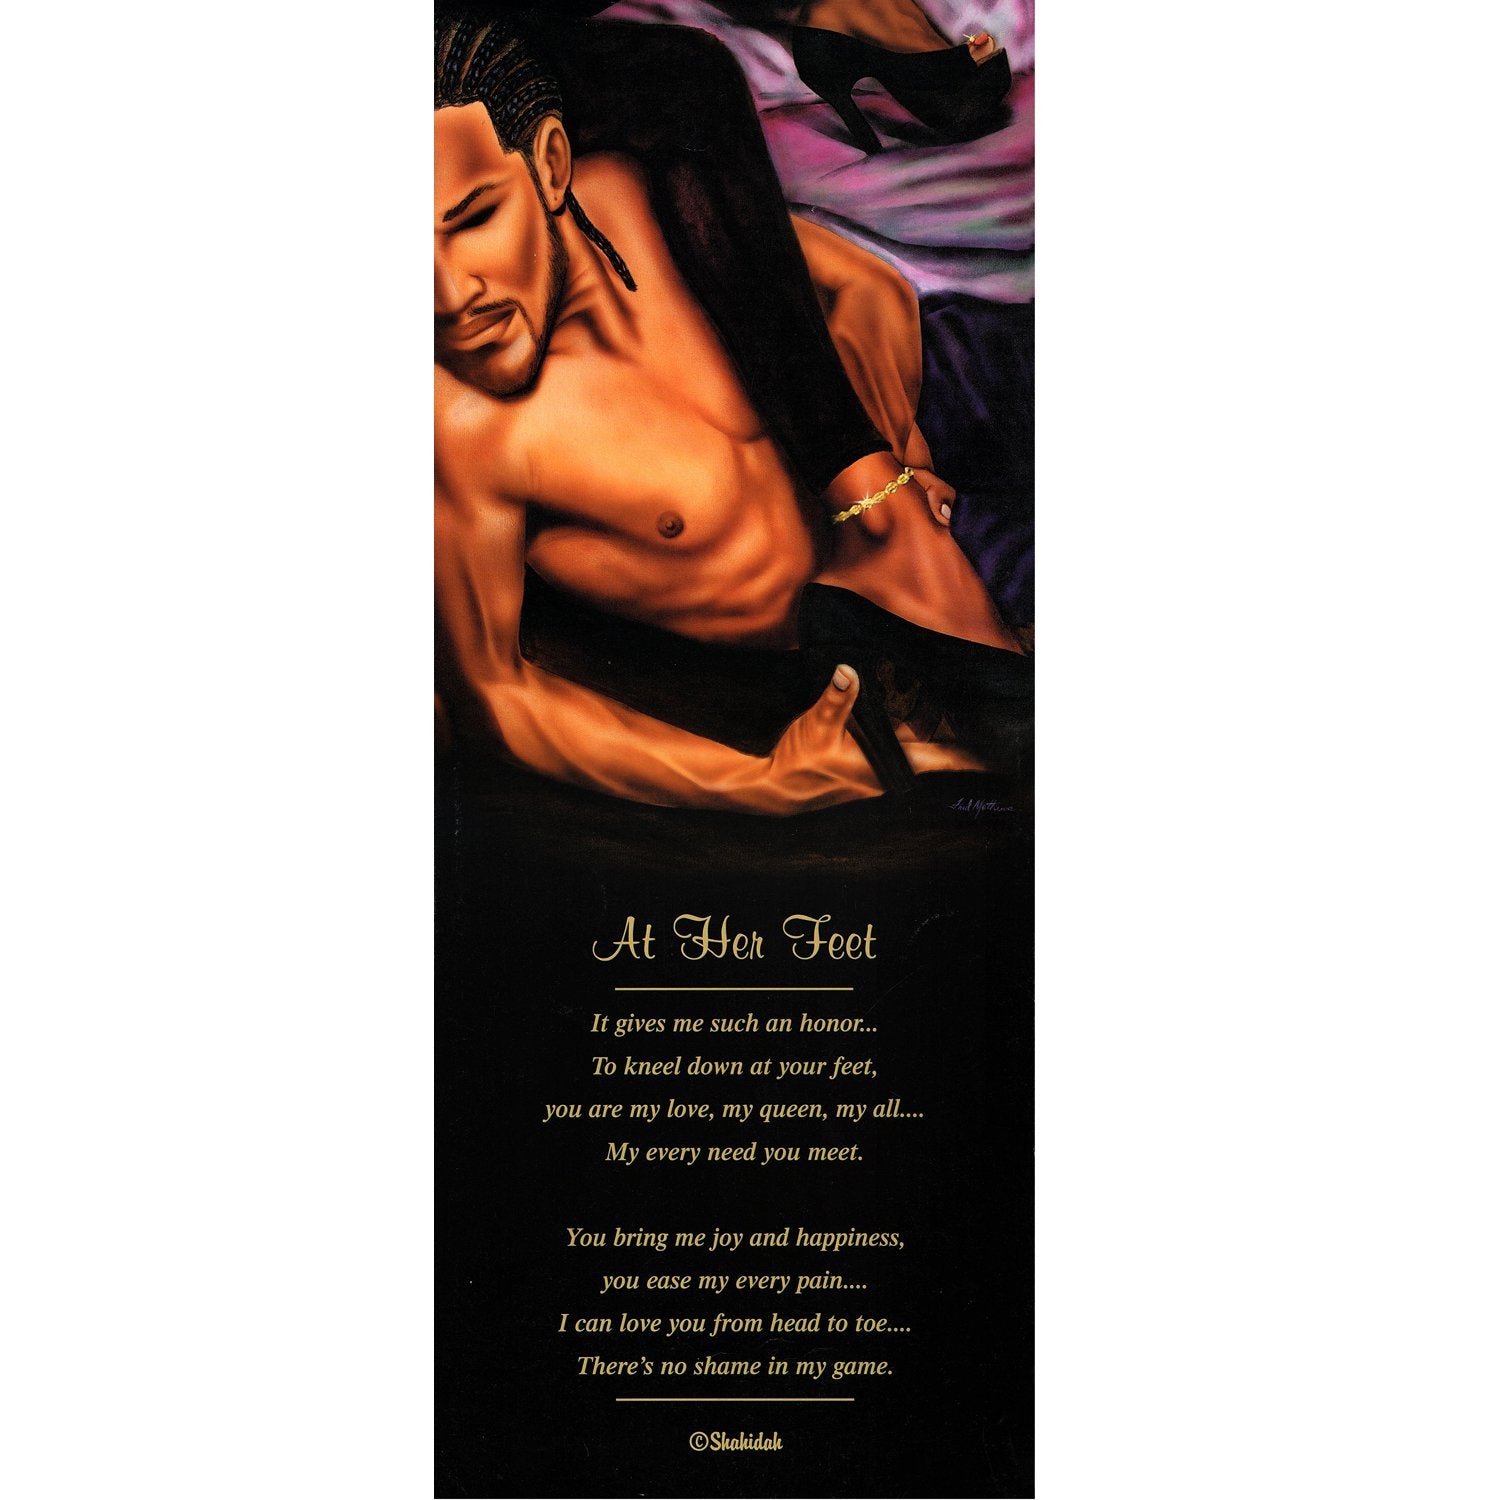 3 of 3: At Her Feet by Fred Mathews and Shahidah